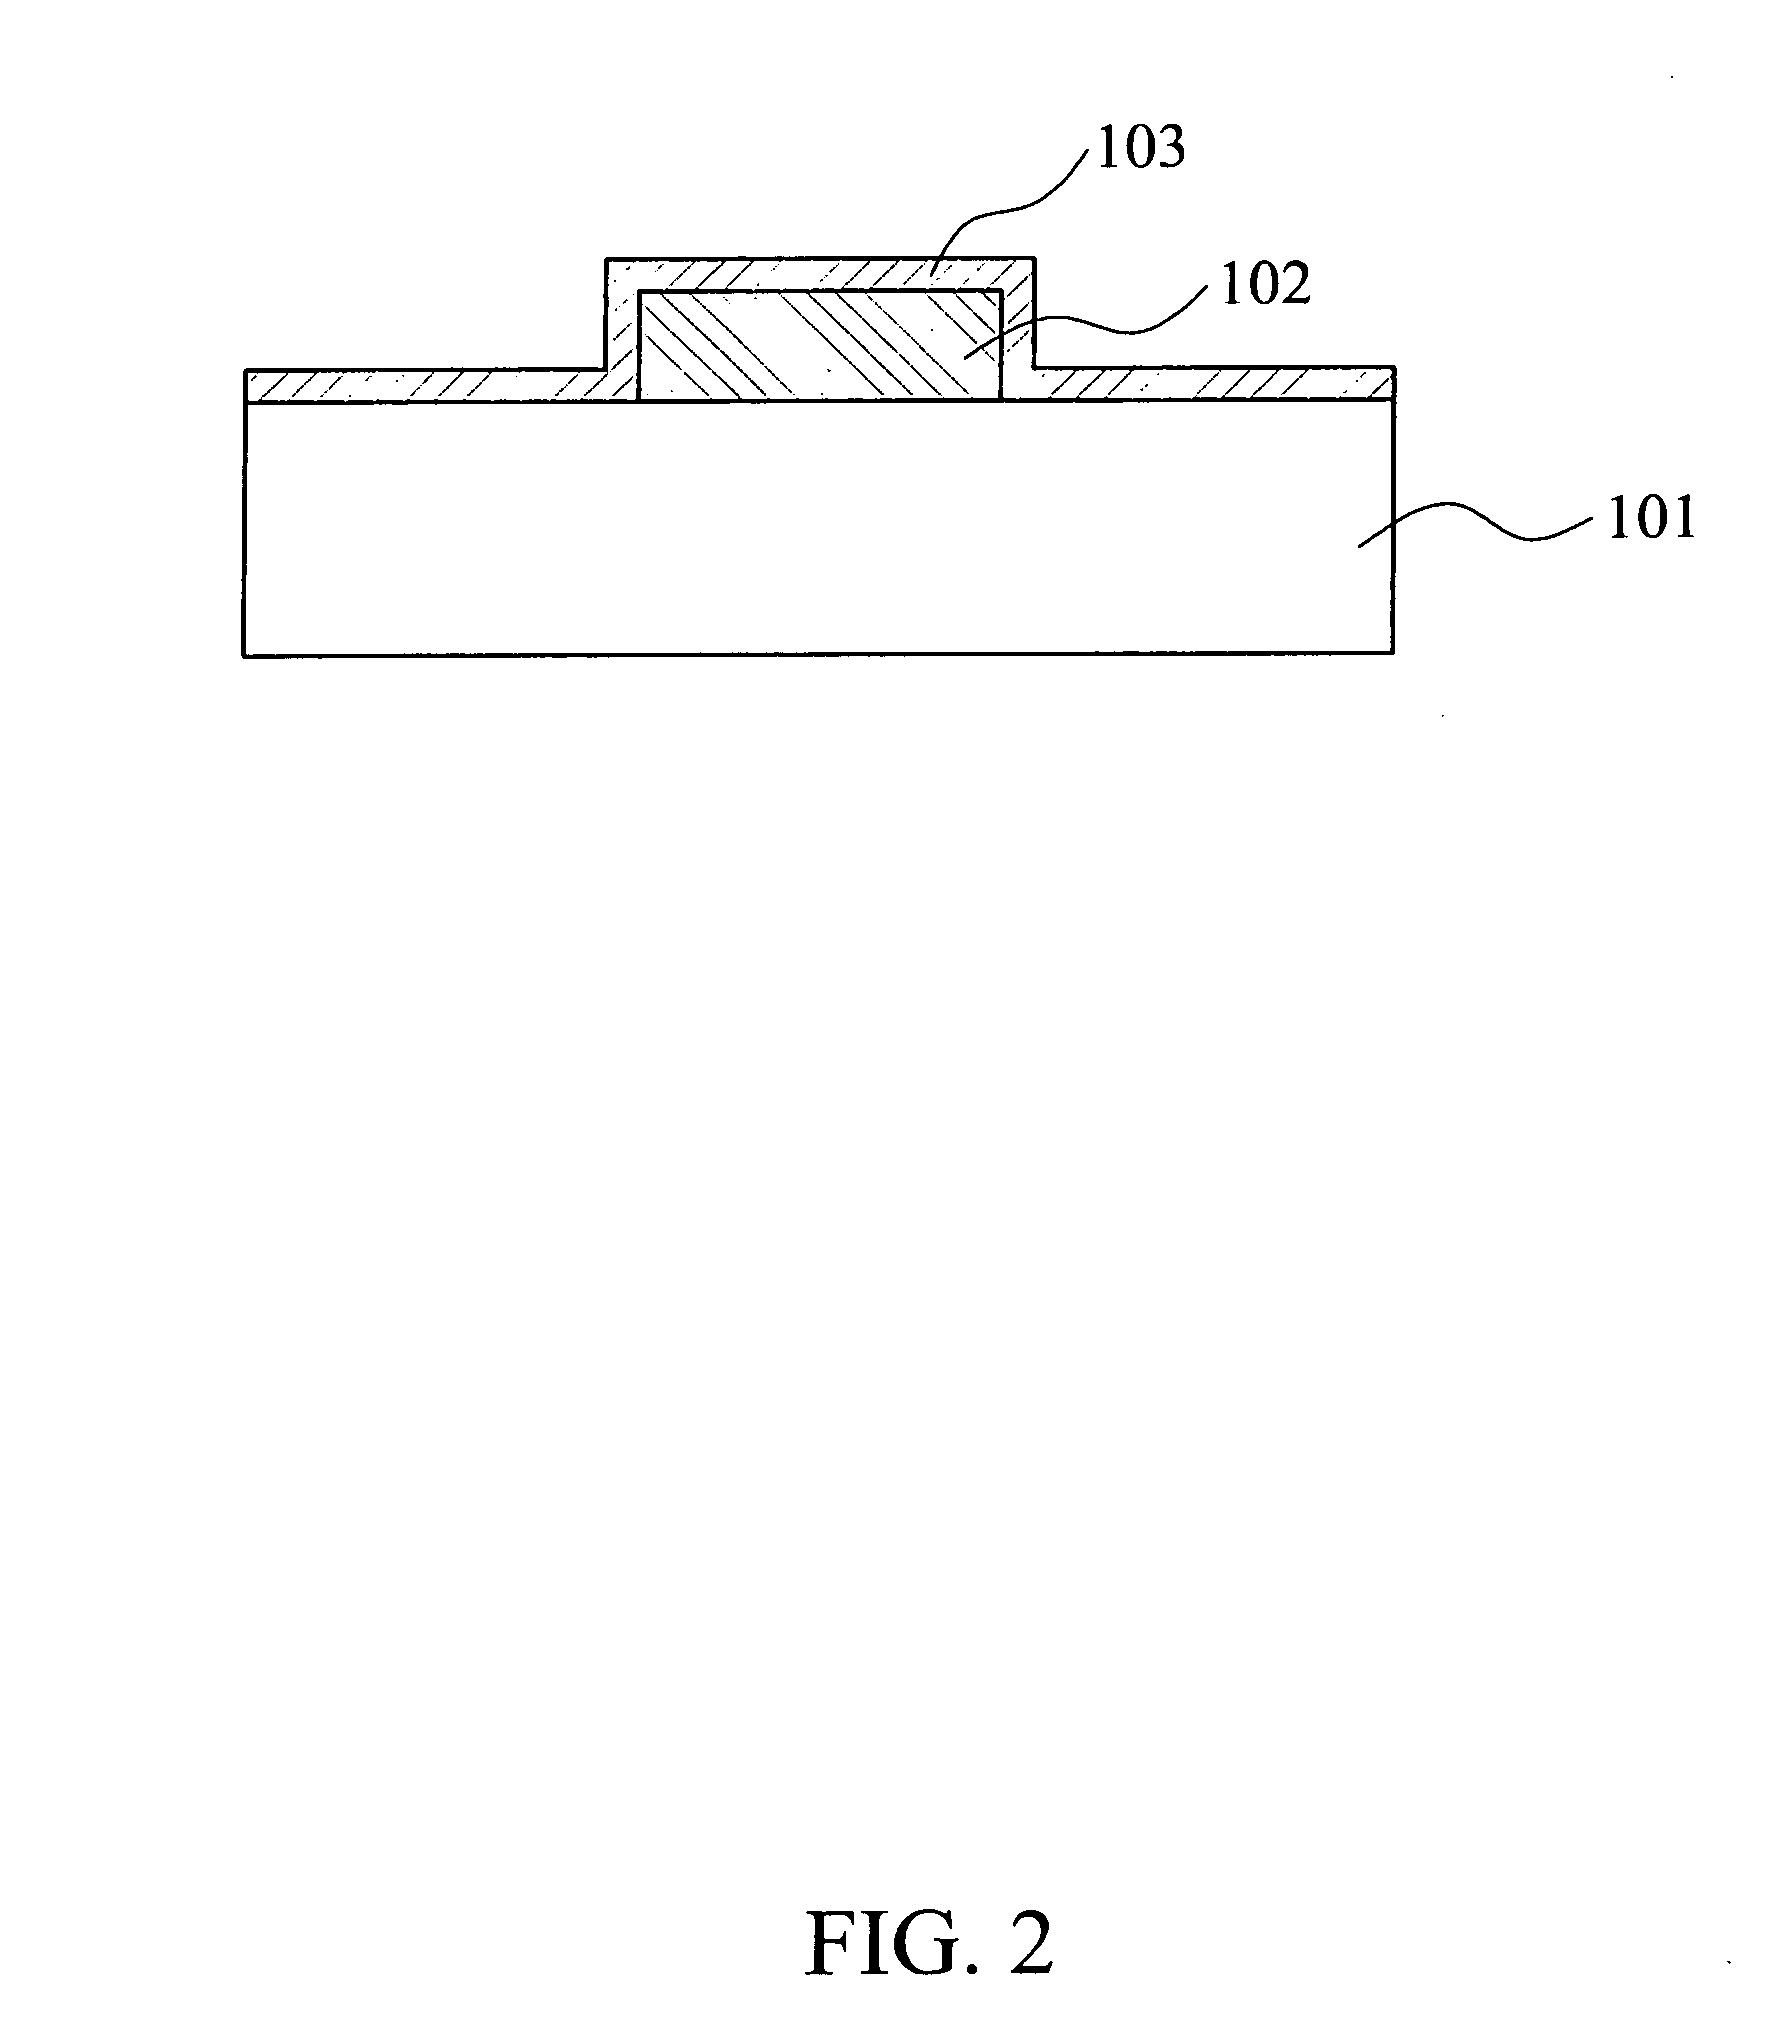 Microelectro mechanical system for magneto-optic data storage apparatus